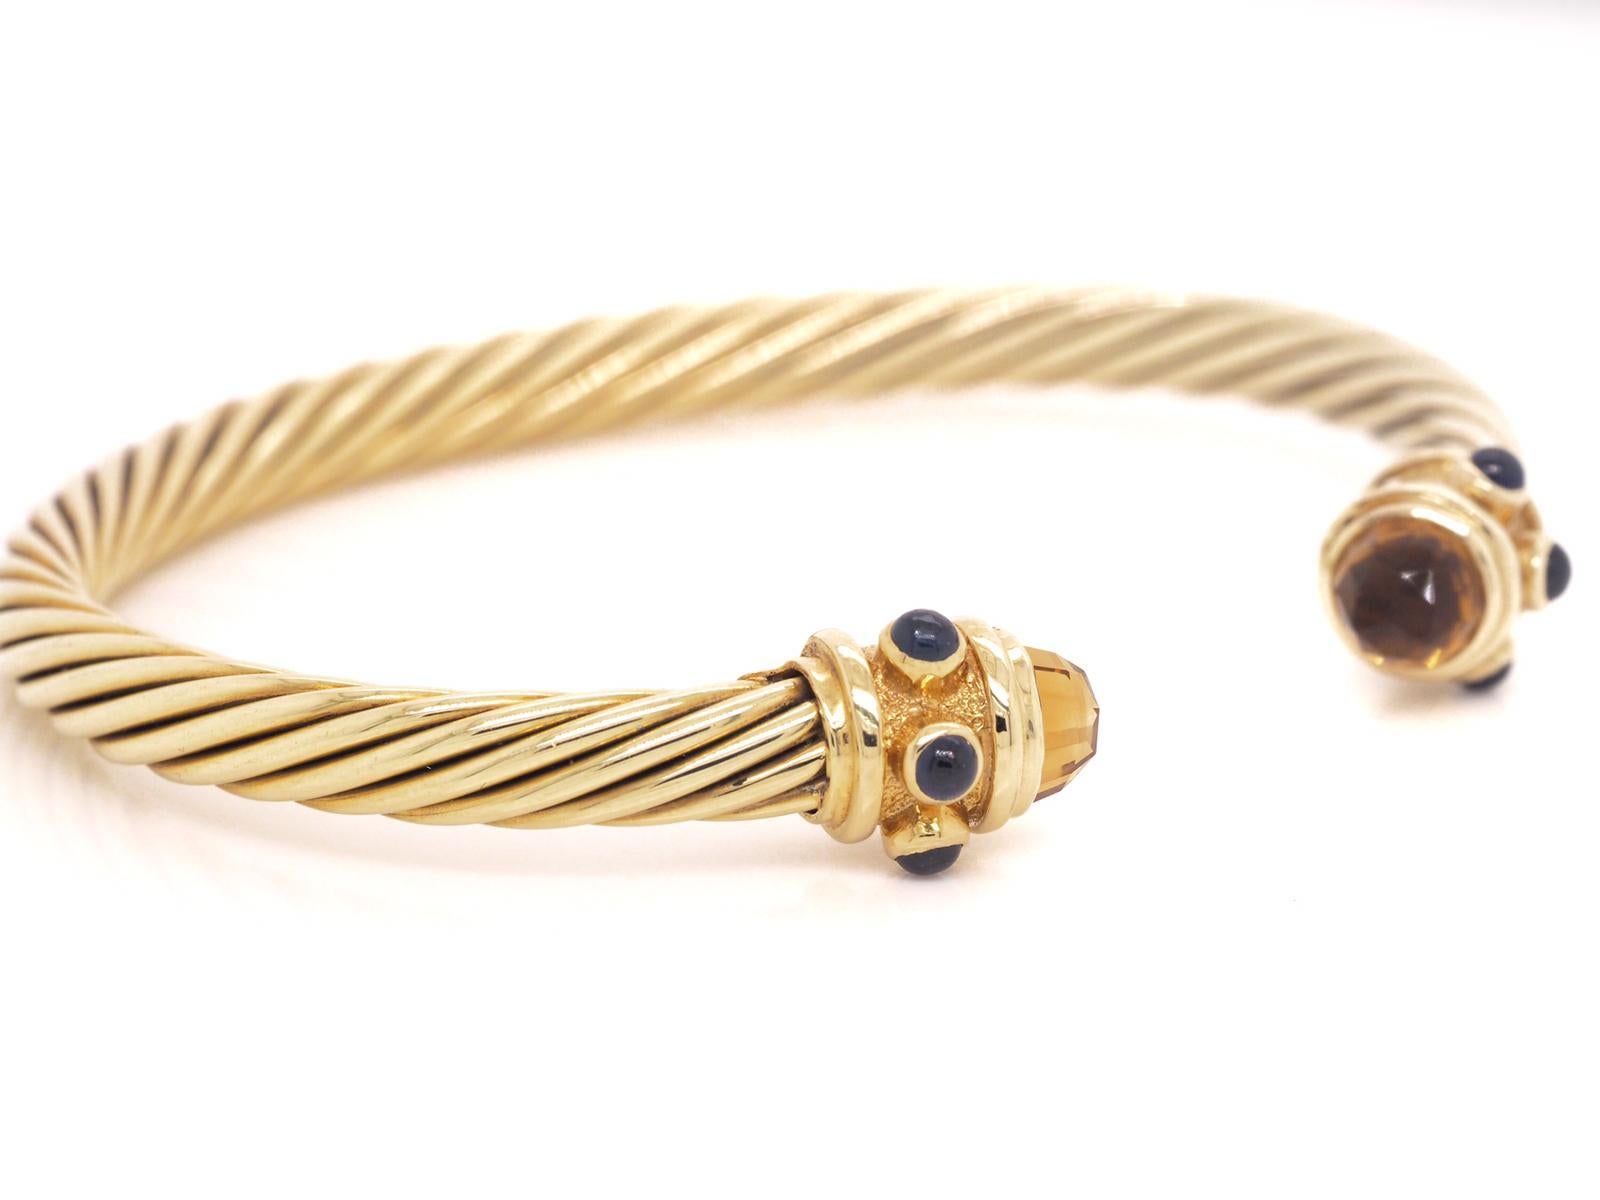 This beautiful David Yurman 14 Karat Yellow Gold Renaissance cuff bracelet was designed in their signature cable design. The cuff bracelet features cabochon sapphires and citrine. It is 5 millimeters in width and weighs approximately 16.8 grams.